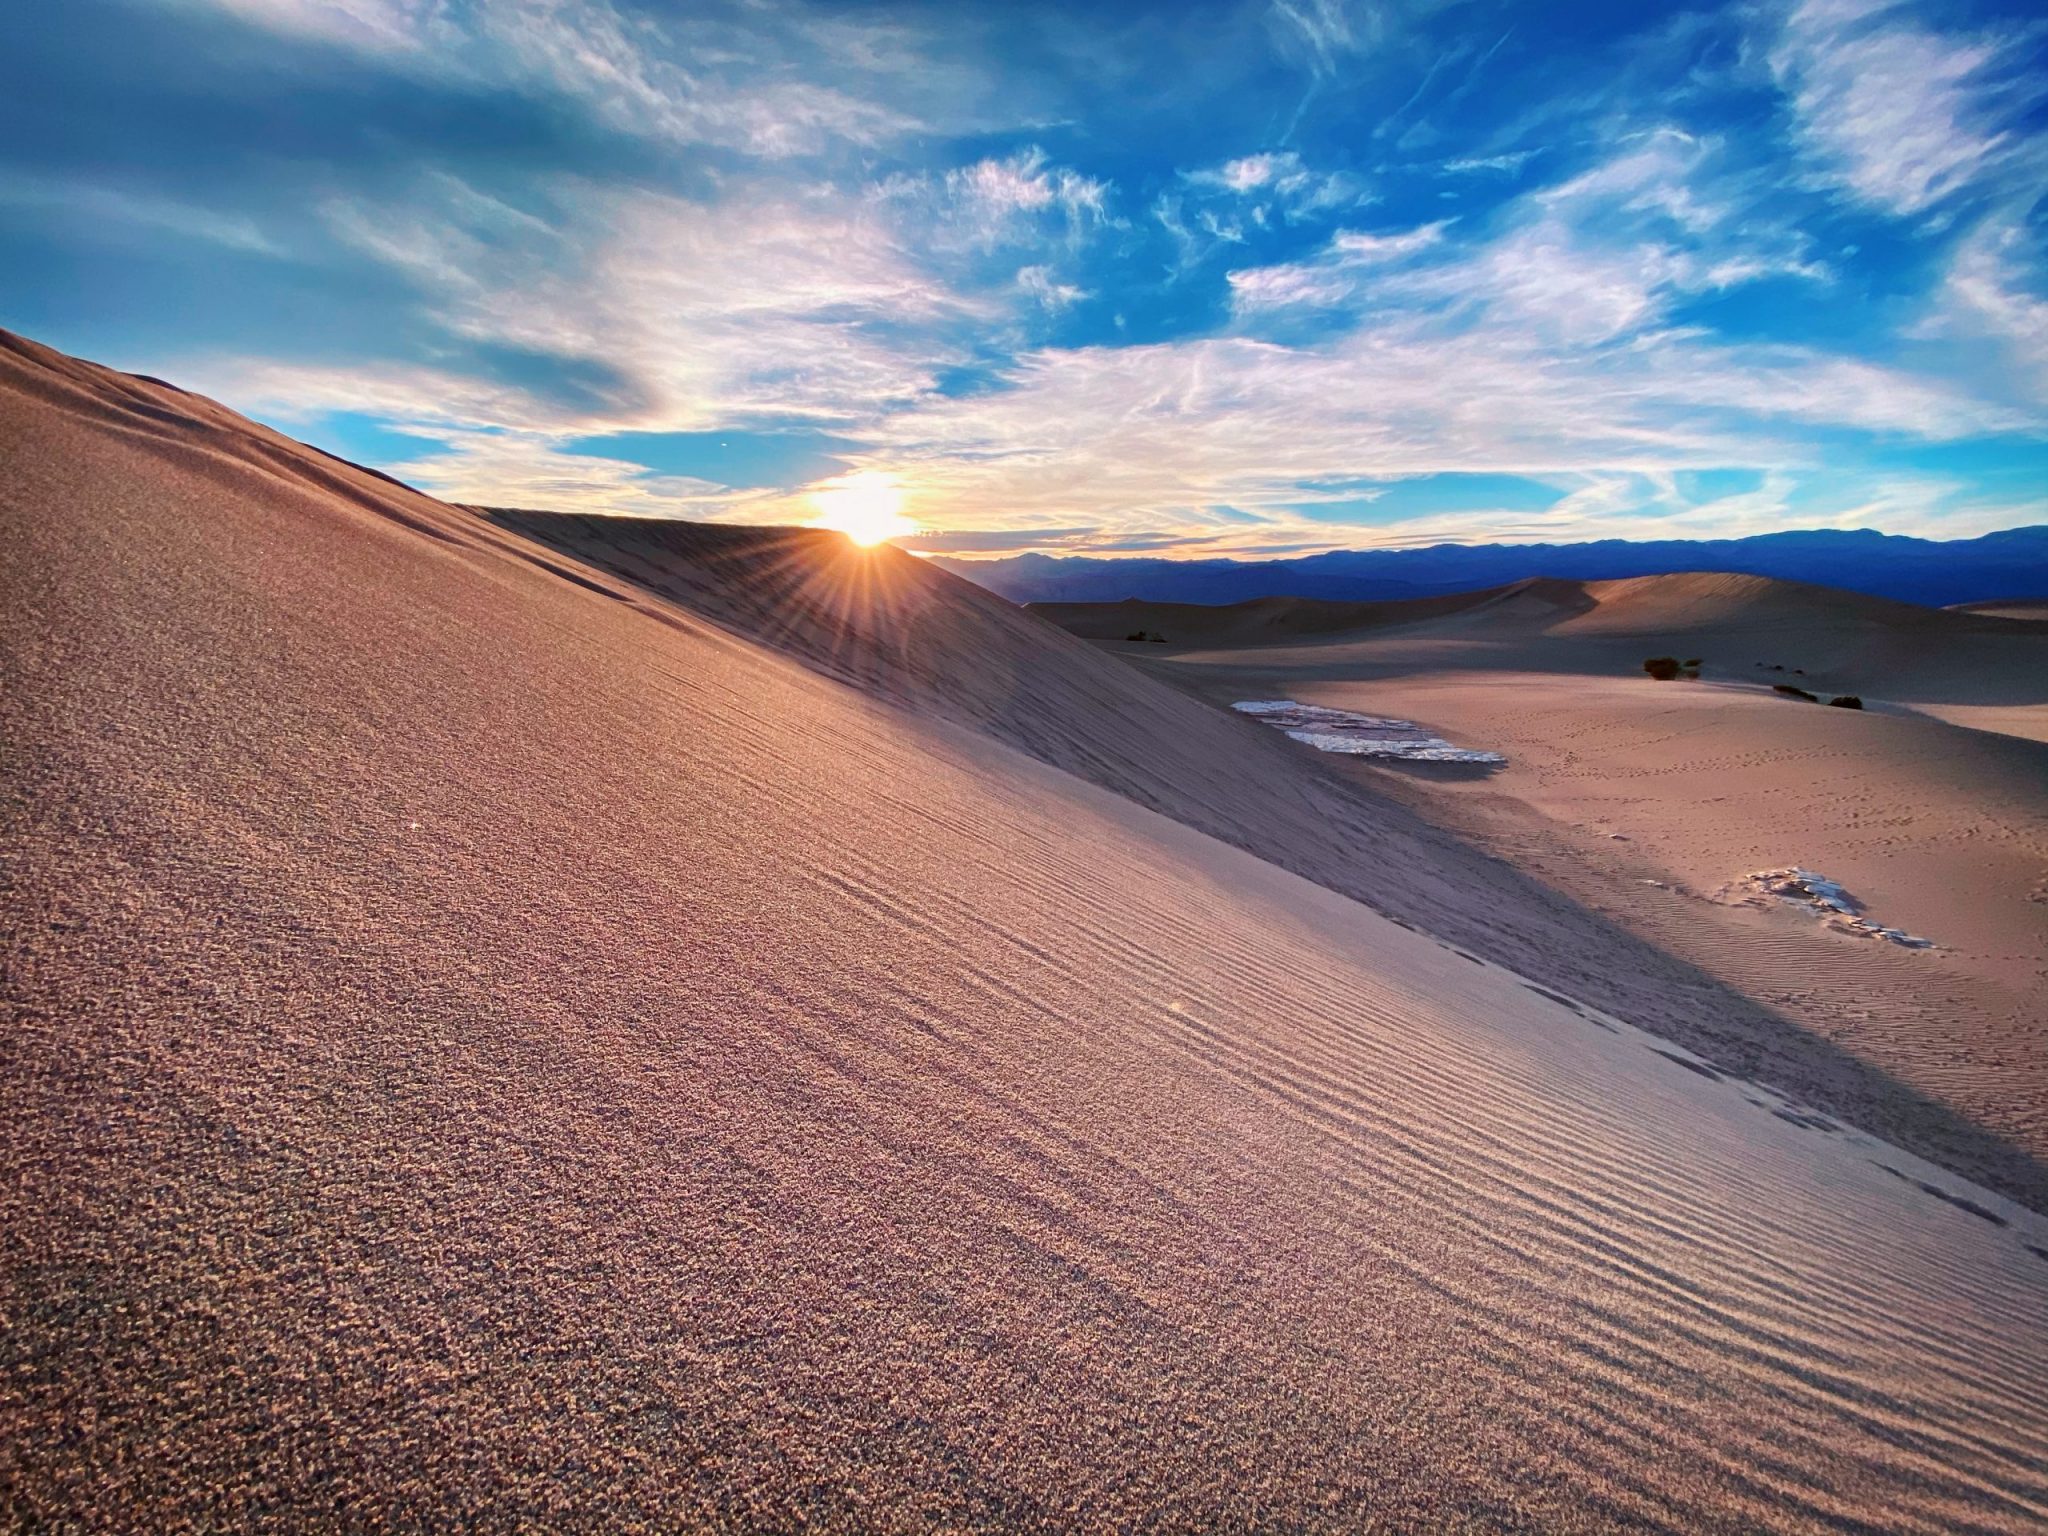 Sunset at the Mesquite Flat Sand Dunes in Death Valley